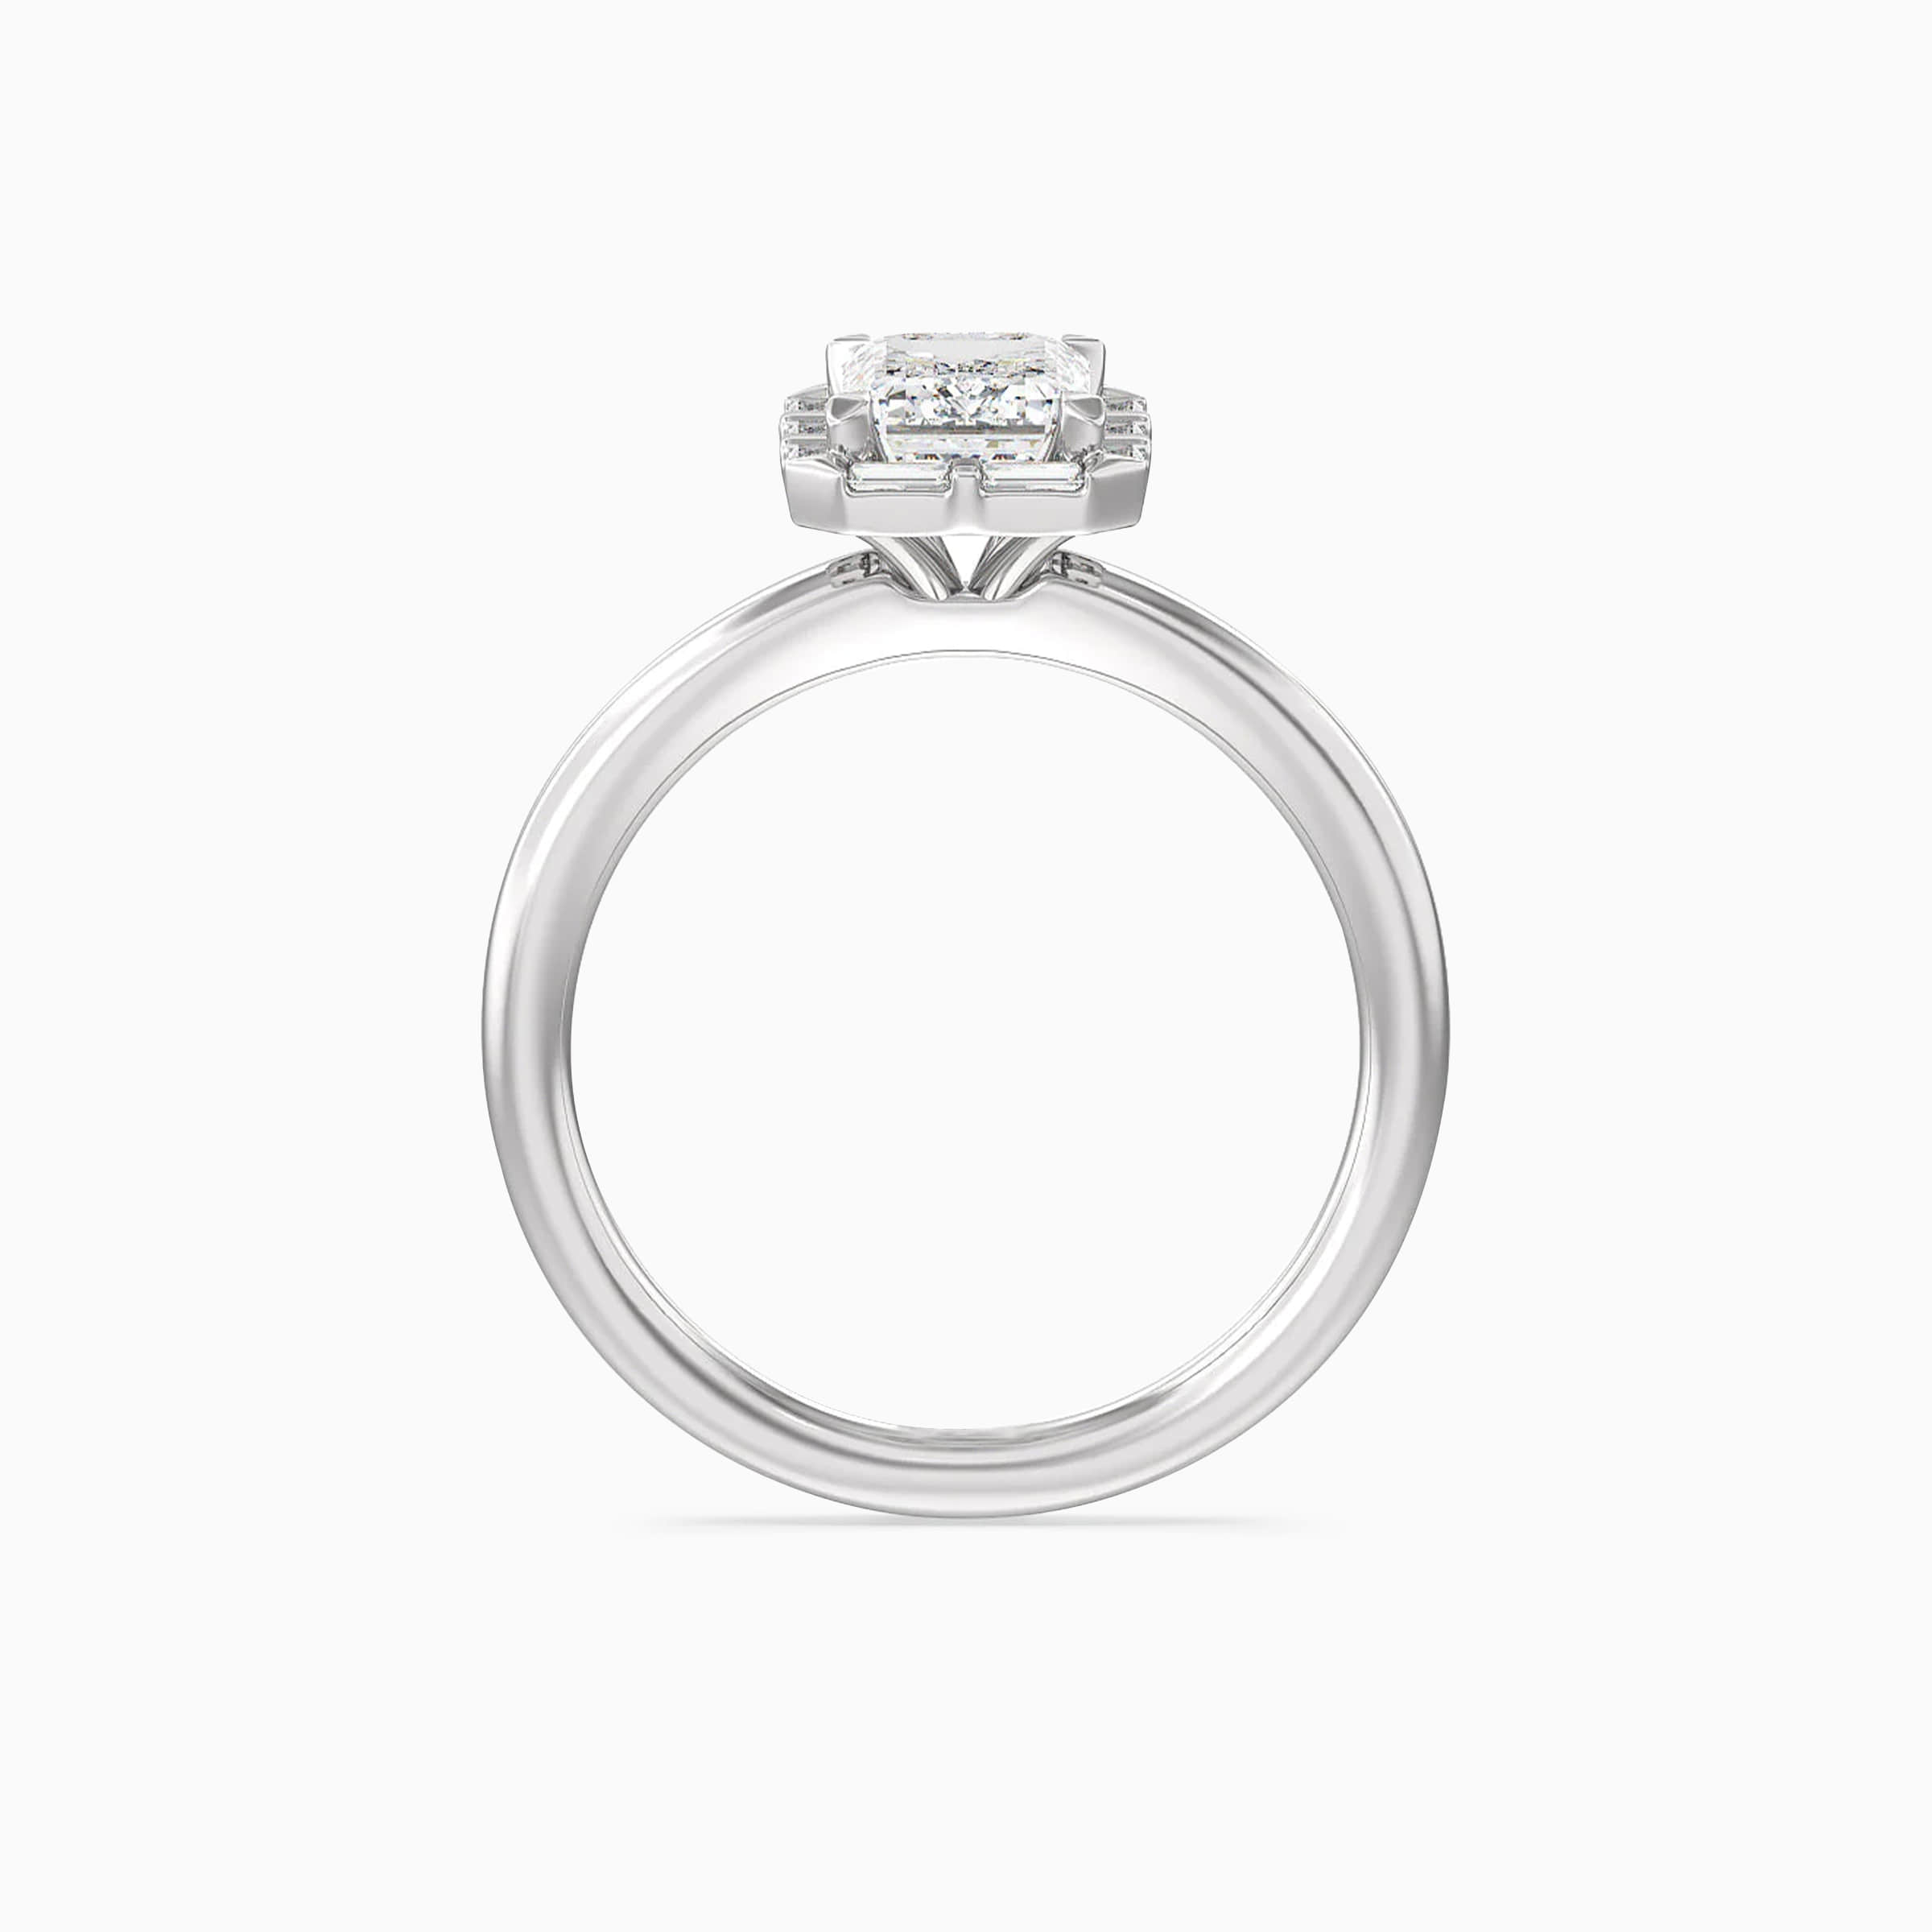 Darry Ring emerald cut halo engagement ring front view